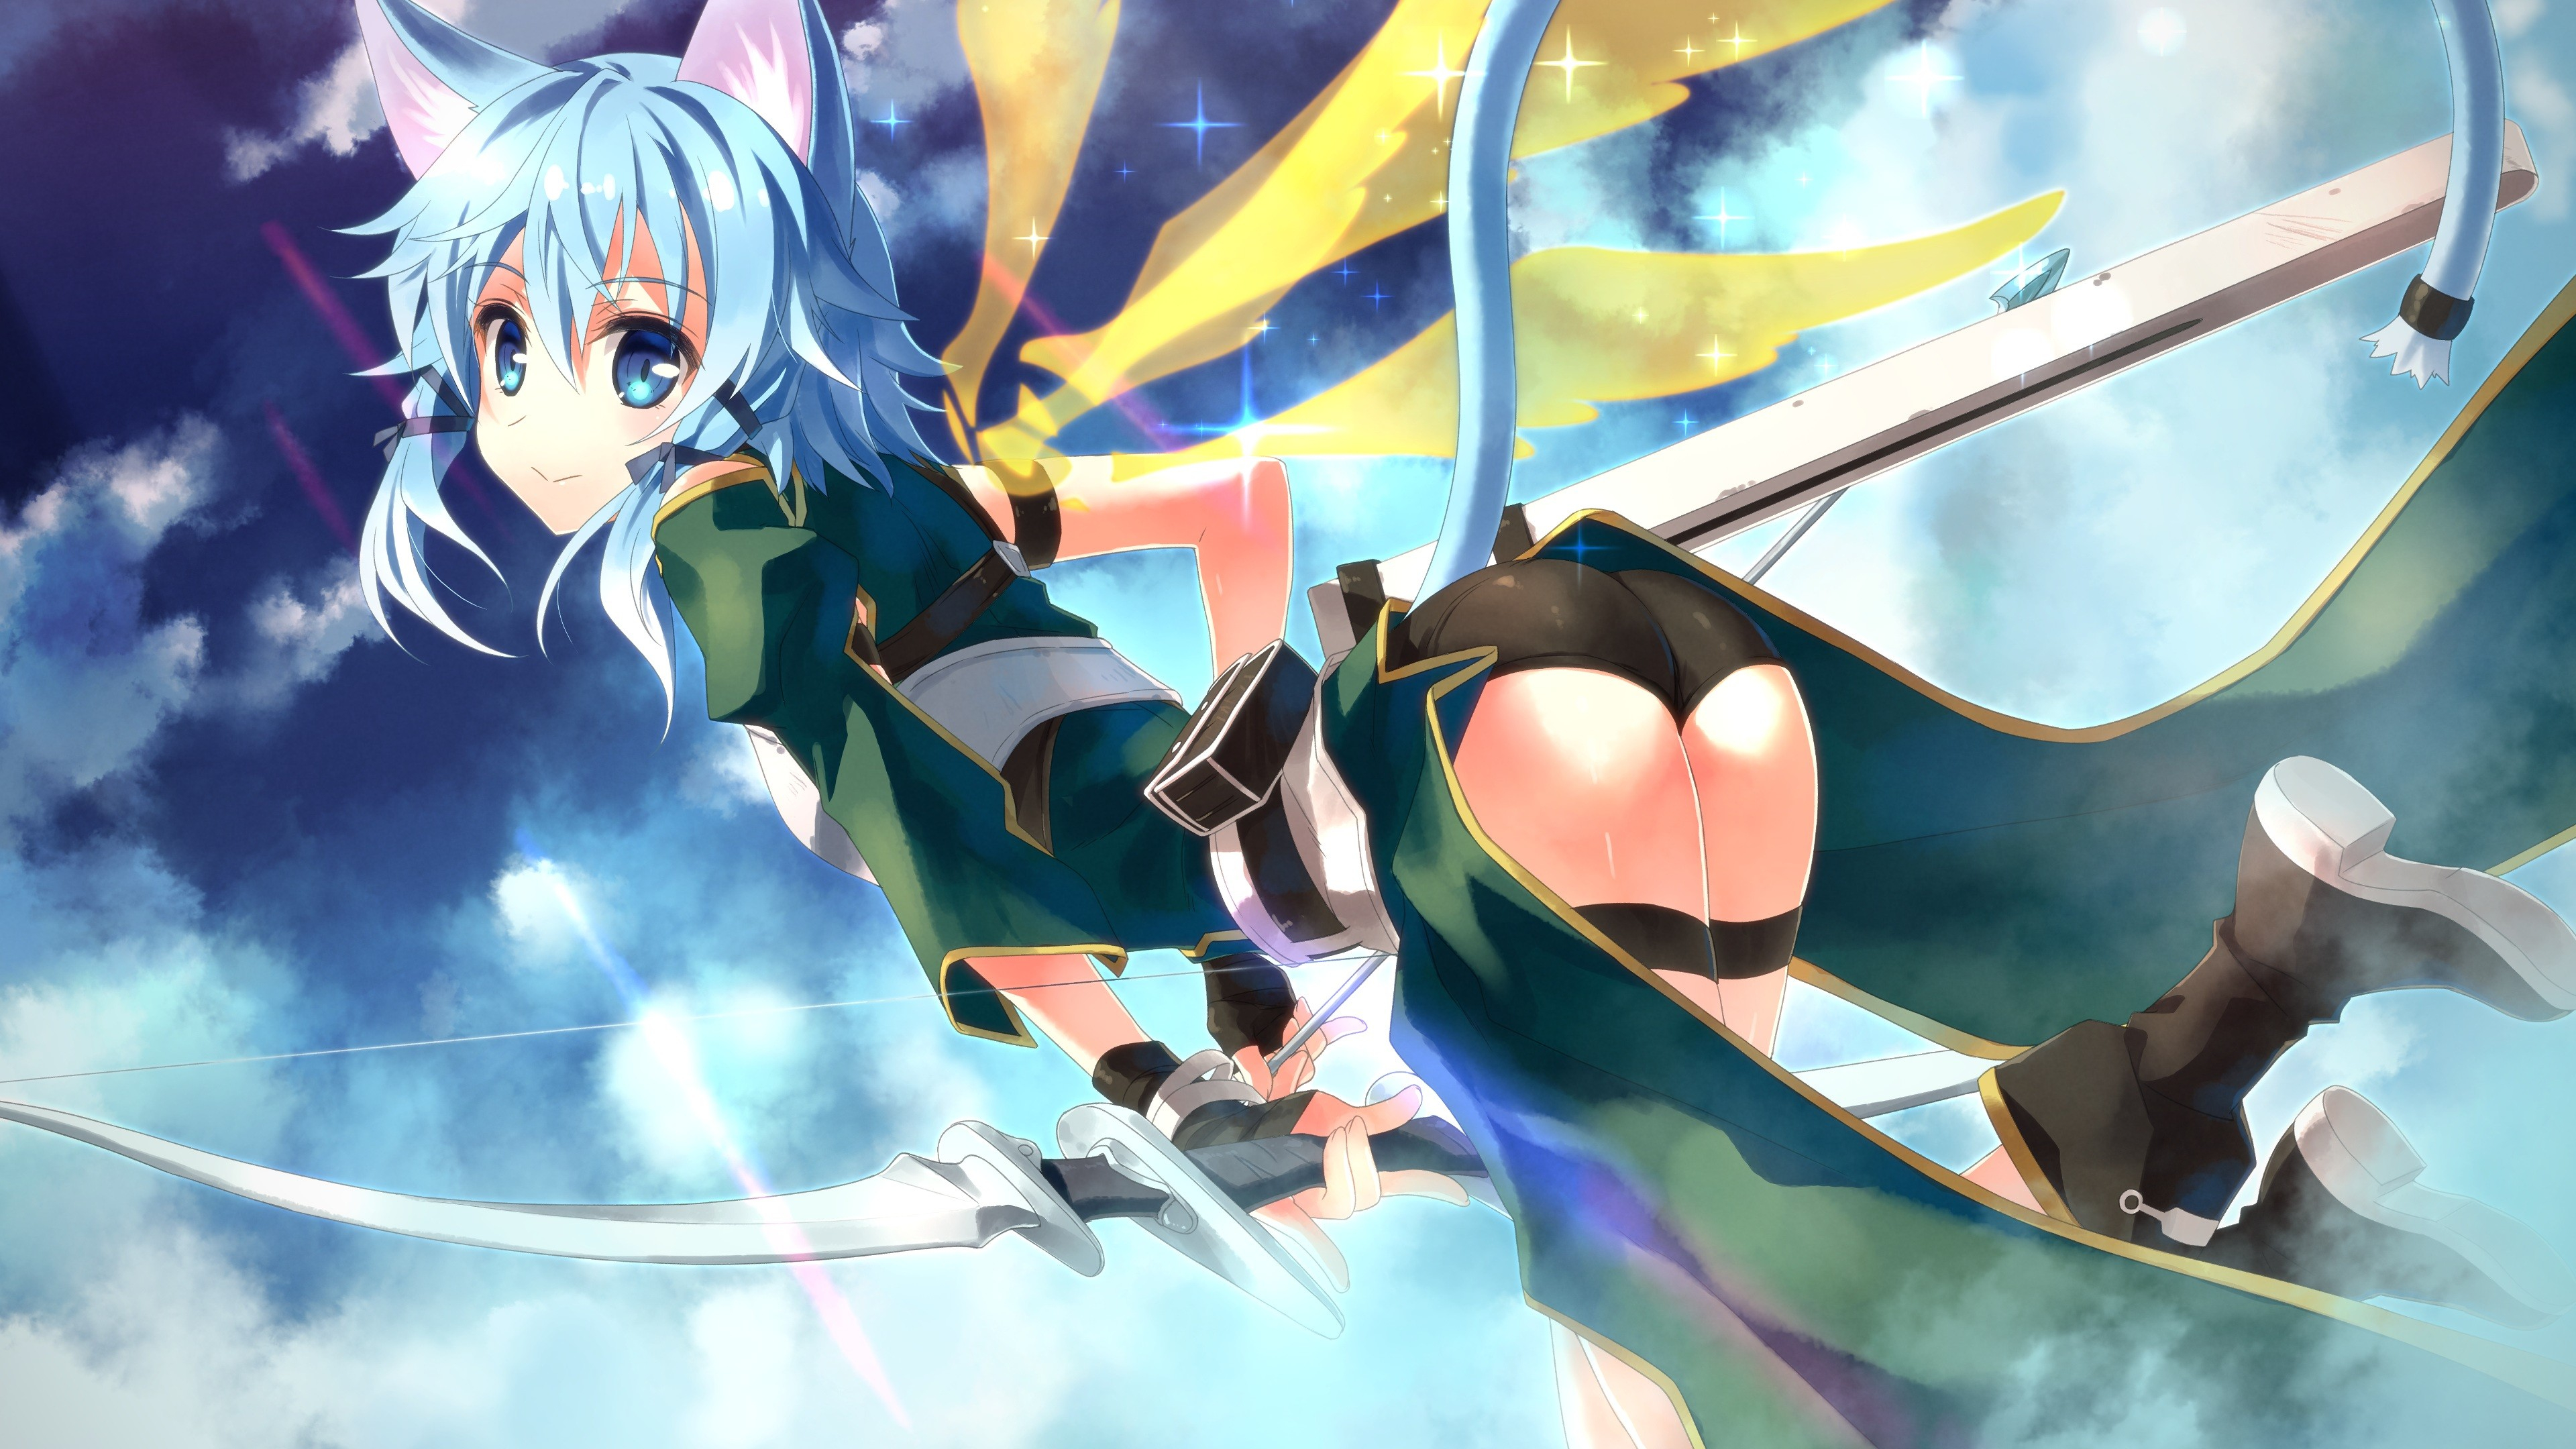 3840x2160 470+ Sinon (Sword Art Online) HD Wallpapers and Backgrounds